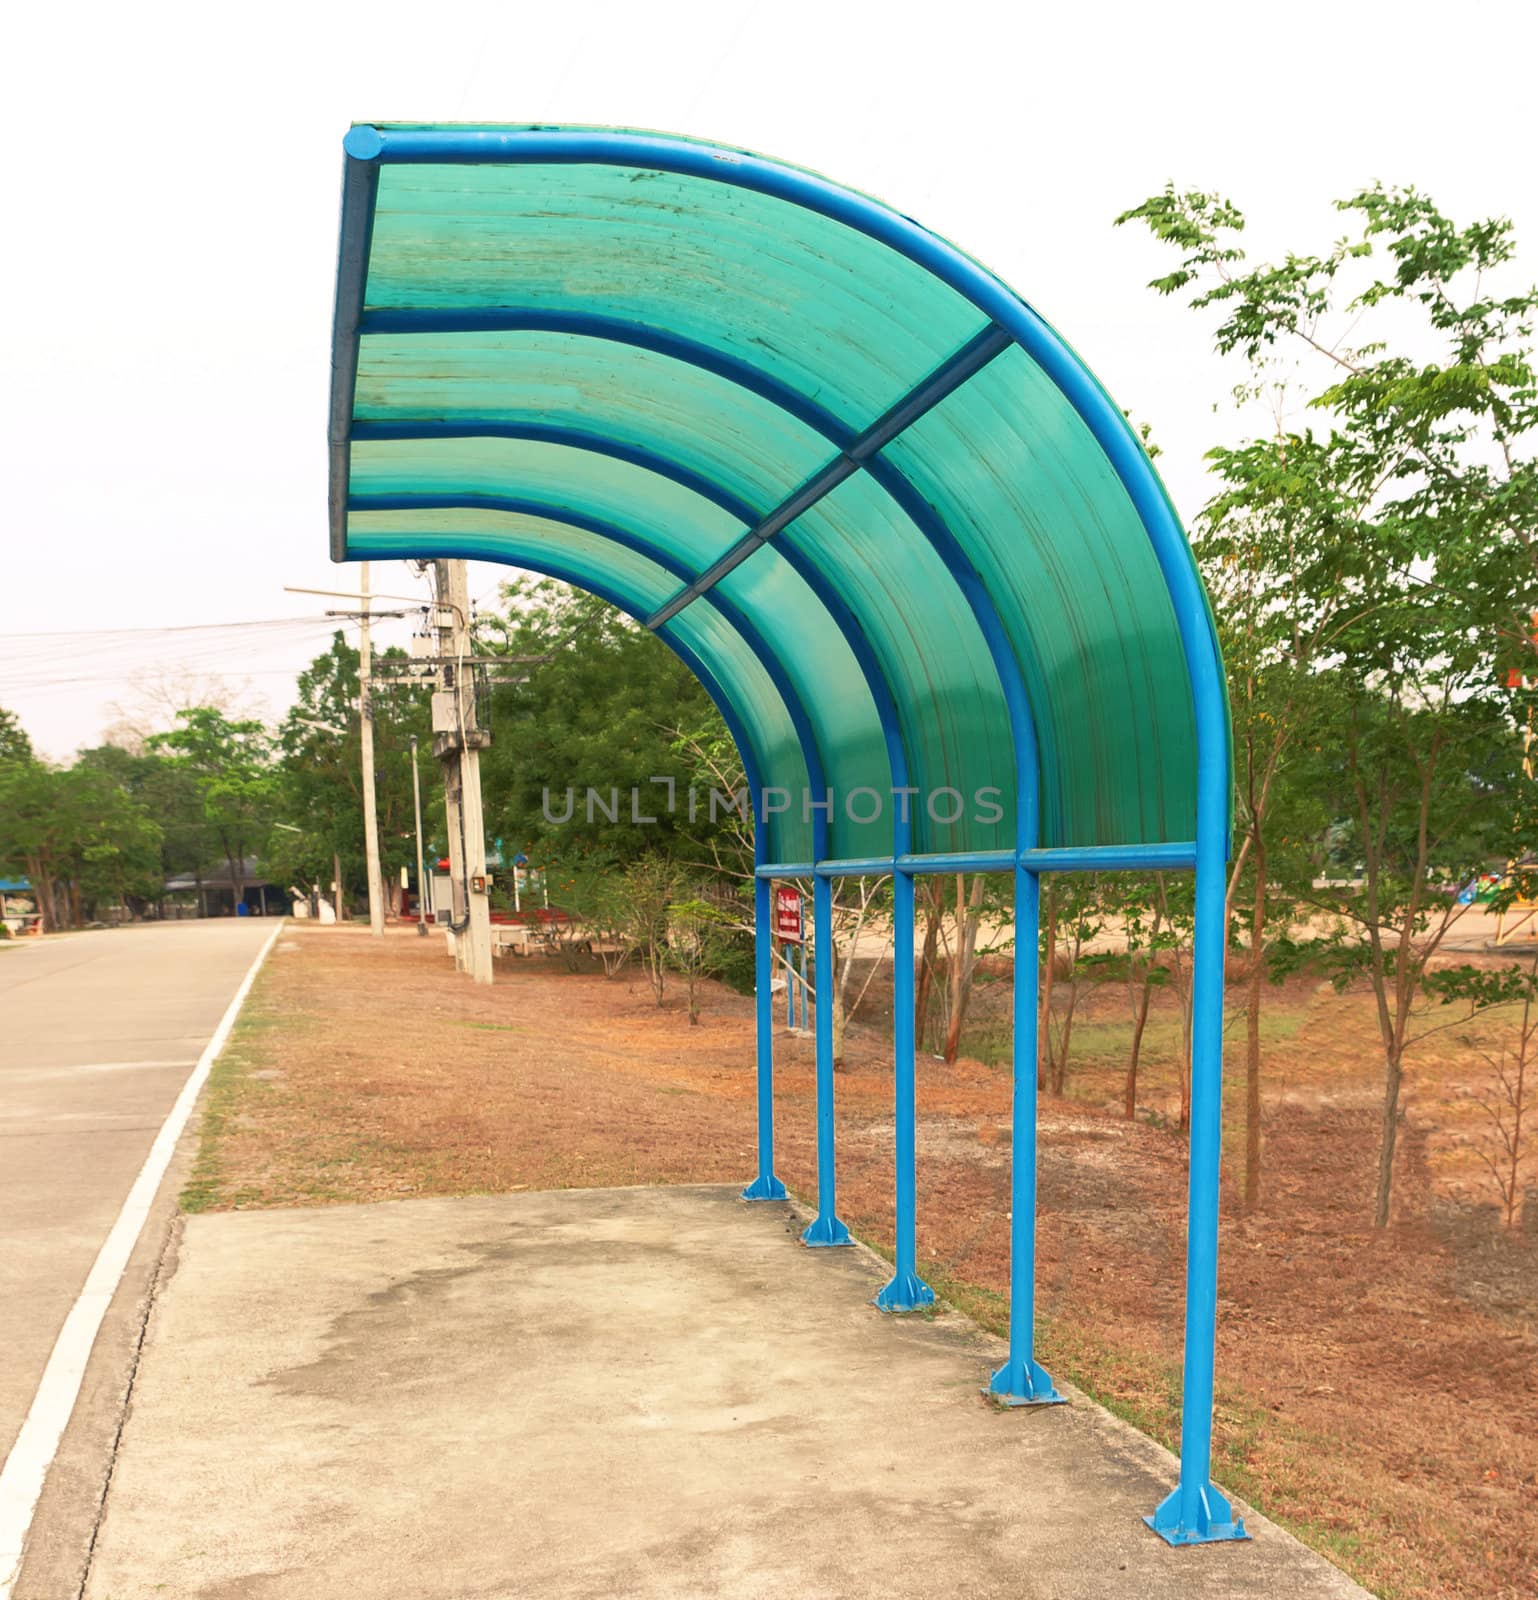 Stance on bus shelters, rain and sunshine with blue